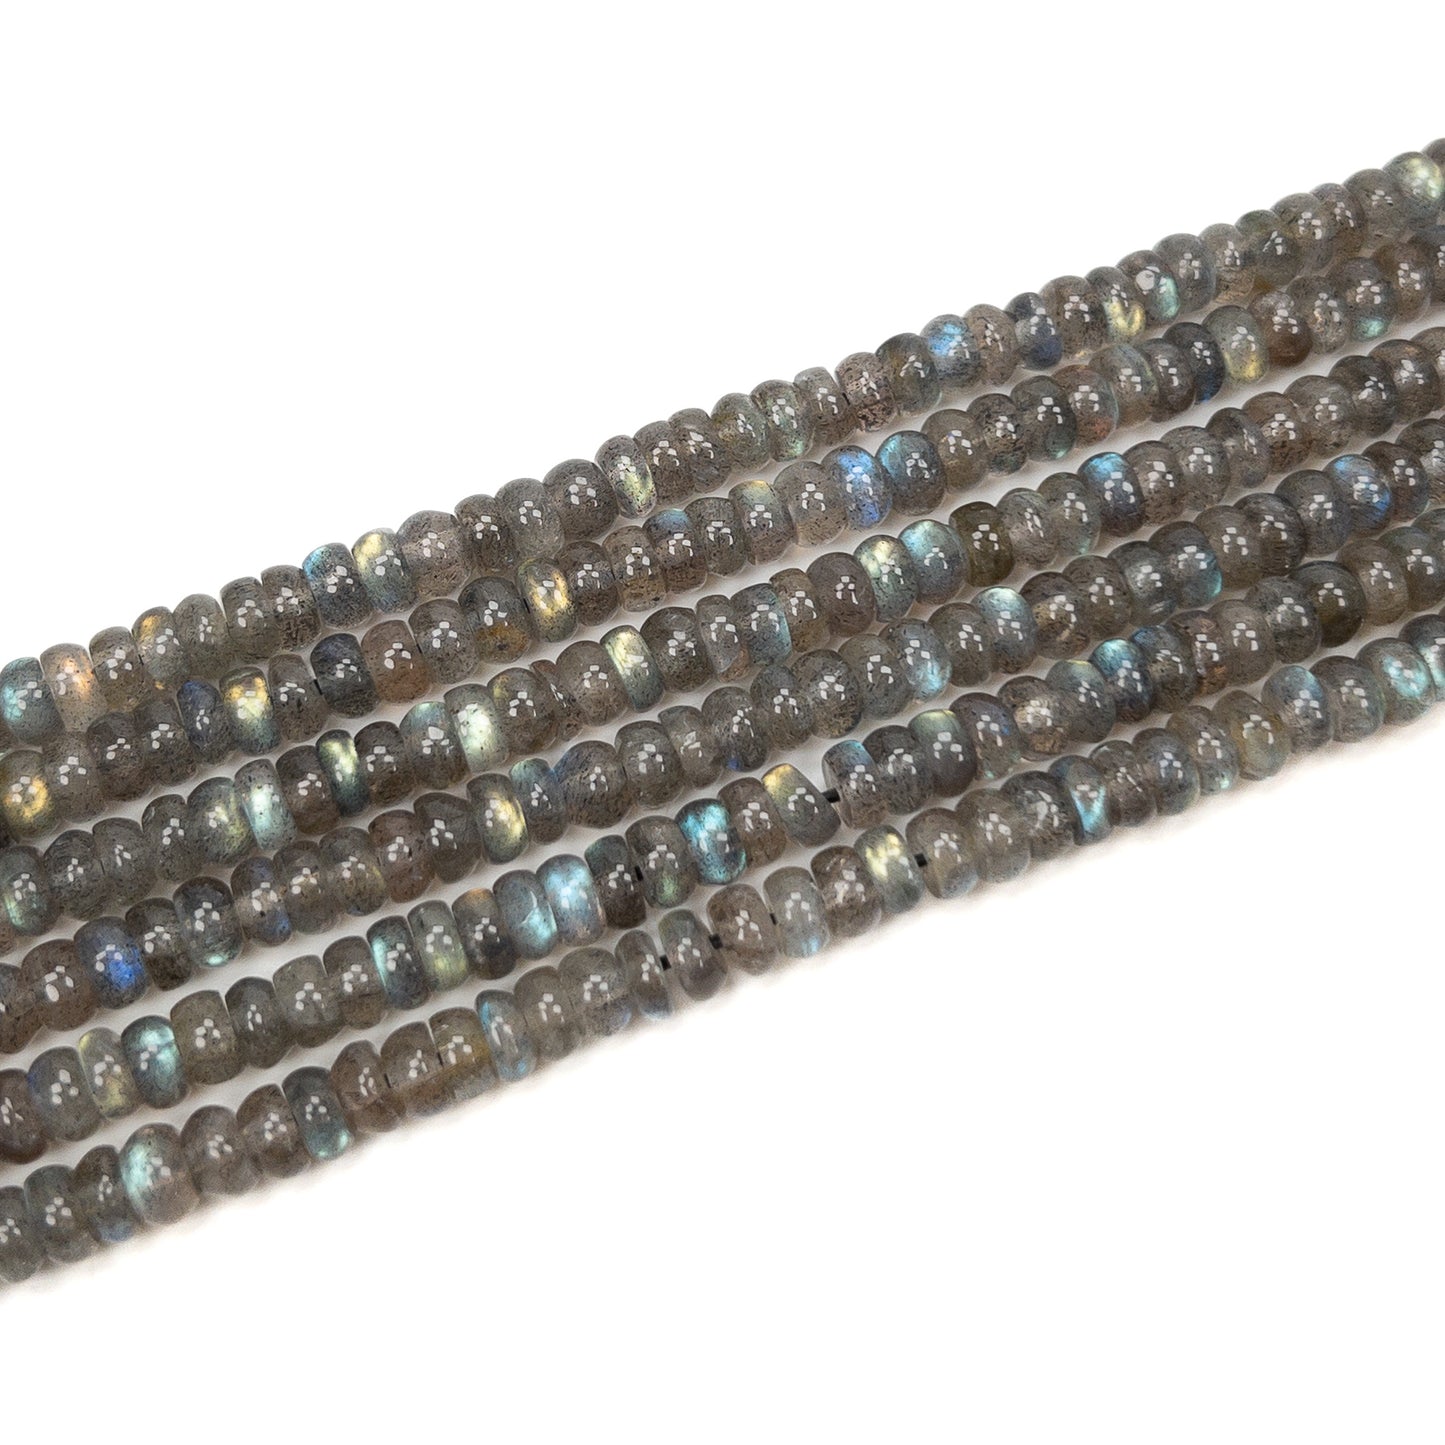 Labradorite 6mm Smooth Slice Bead (2 Quantities Available)